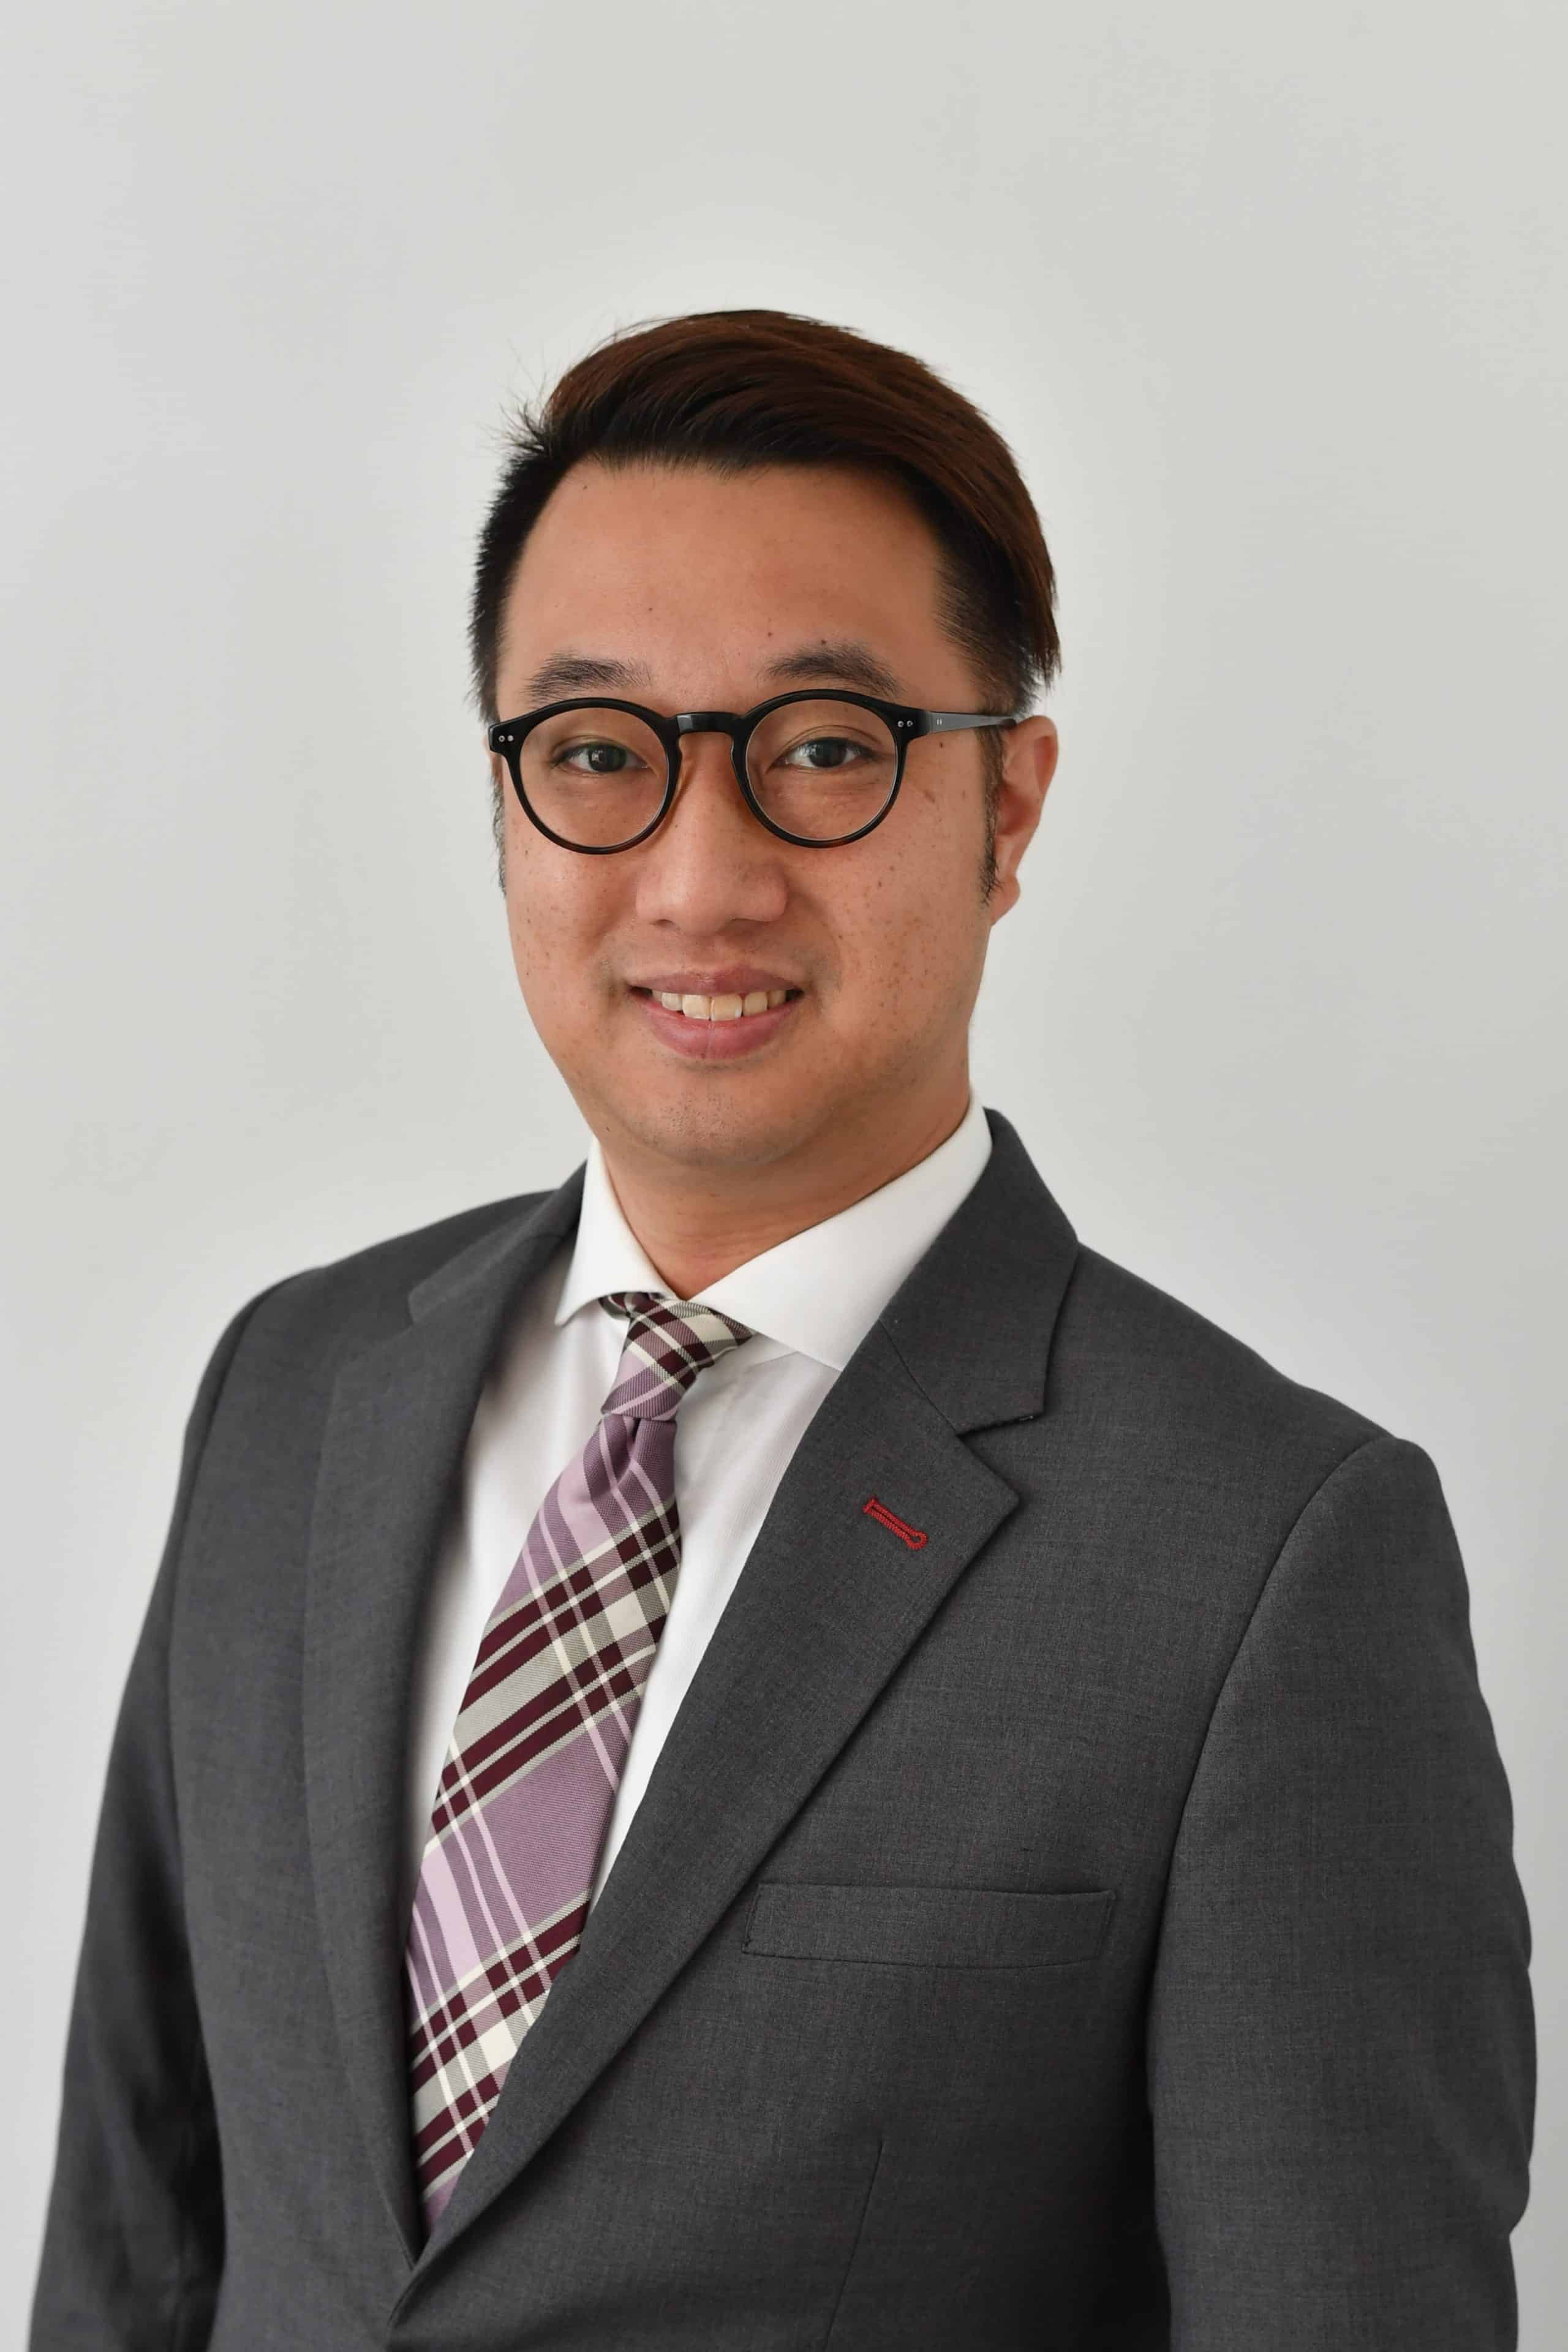 James CP Wong is an Account Director in Hong Kong where he is a multi-disciplined professional spanning corporate communications, investor relations, crisis communications and technology industries.